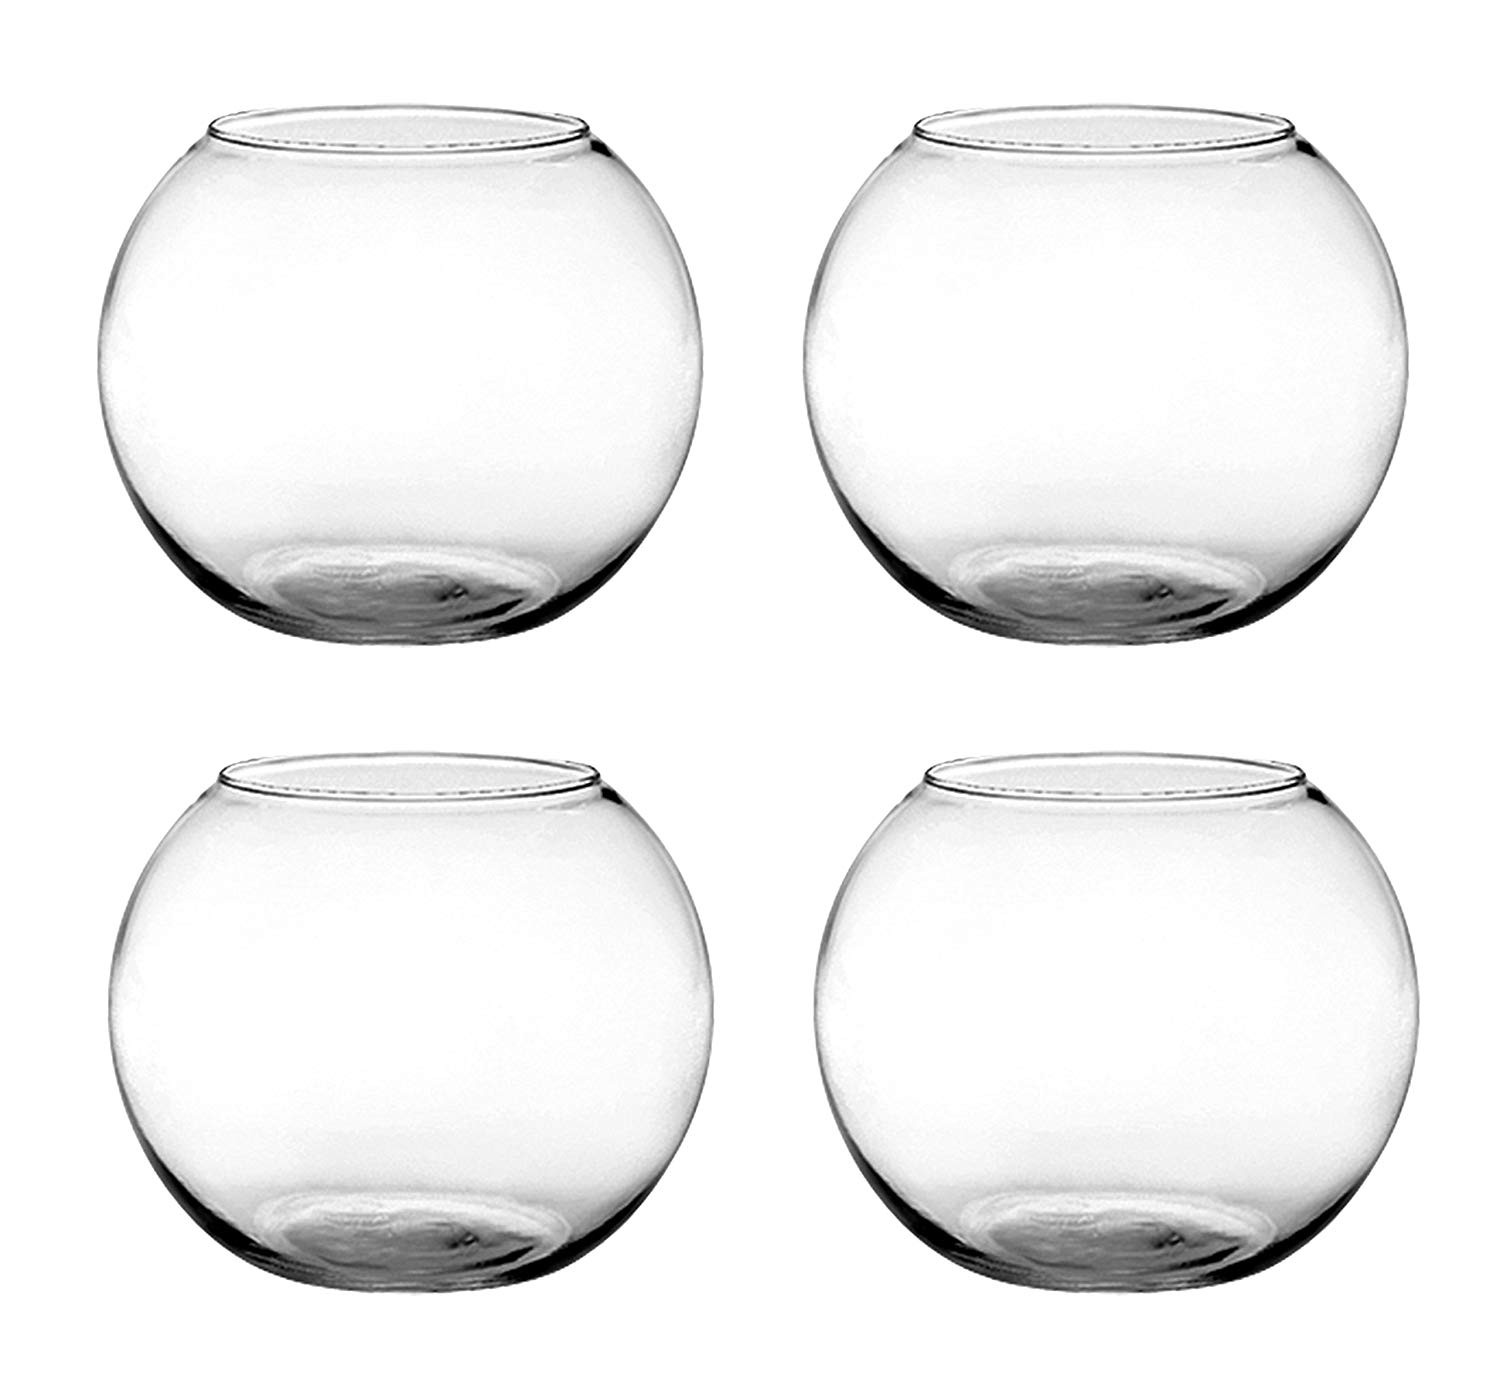 24 Amazing 20 Inch Clear Glass Vase 2024 free download 20 inch clear glass vase of amazon com set of 4 syndicate sales 6 inches clear rose bowl intended for amazon com set of 4 syndicate sales 6 inches clear rose bowl bundled by maven gifts gard